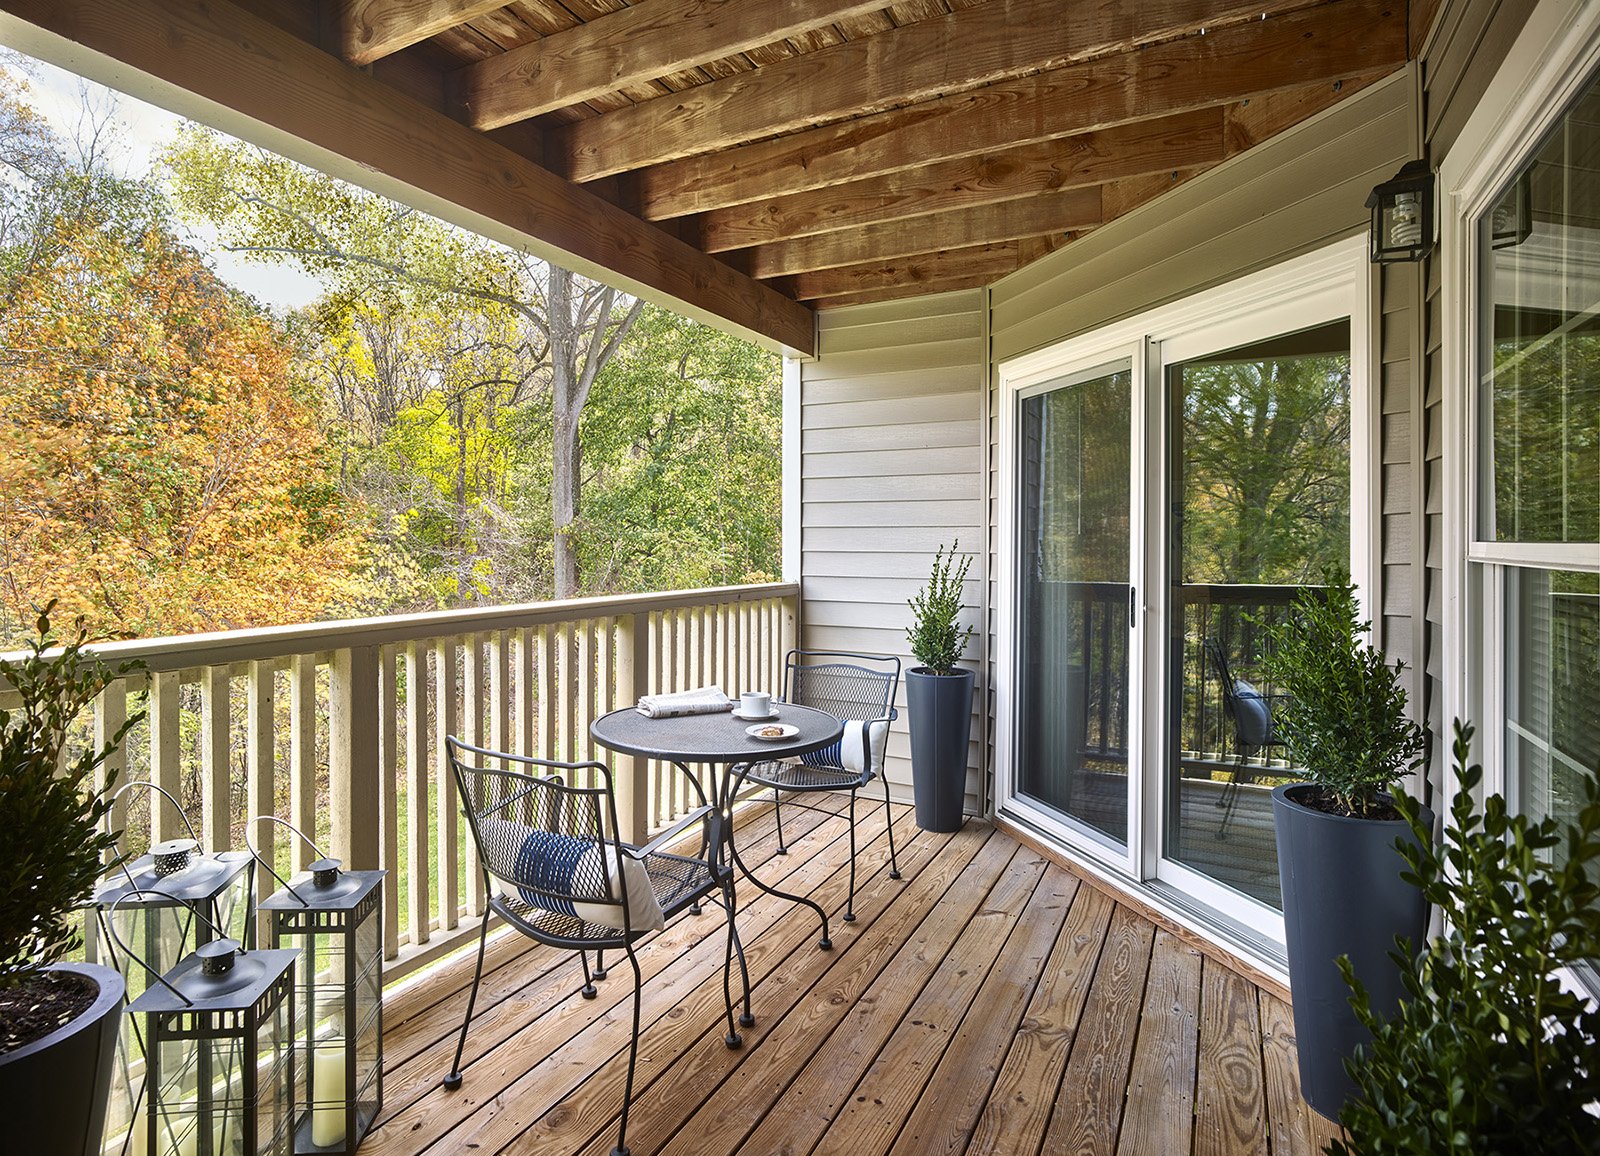 Wooden balcony with table looking out to changing leaves in forest